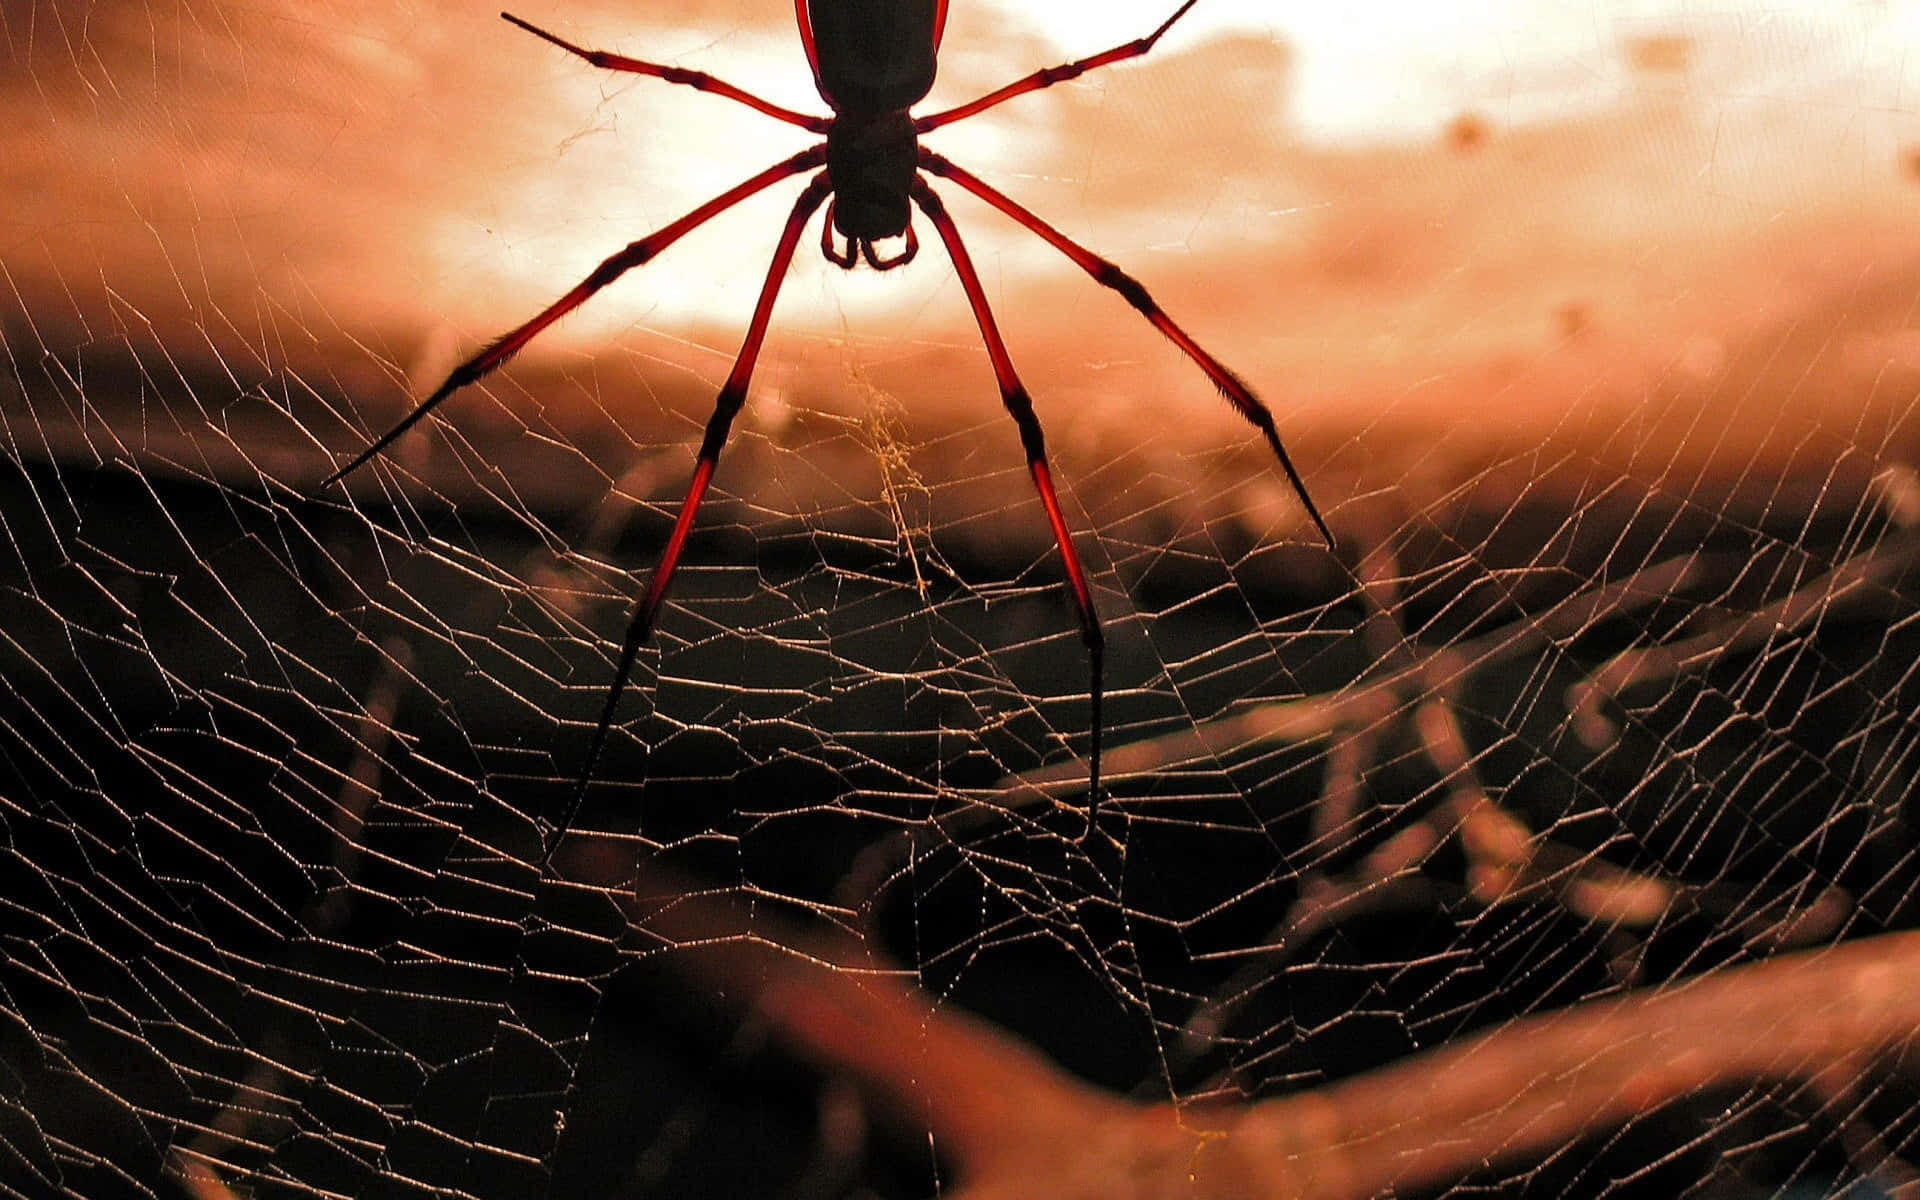 A close-up view of a spider in its natural environment